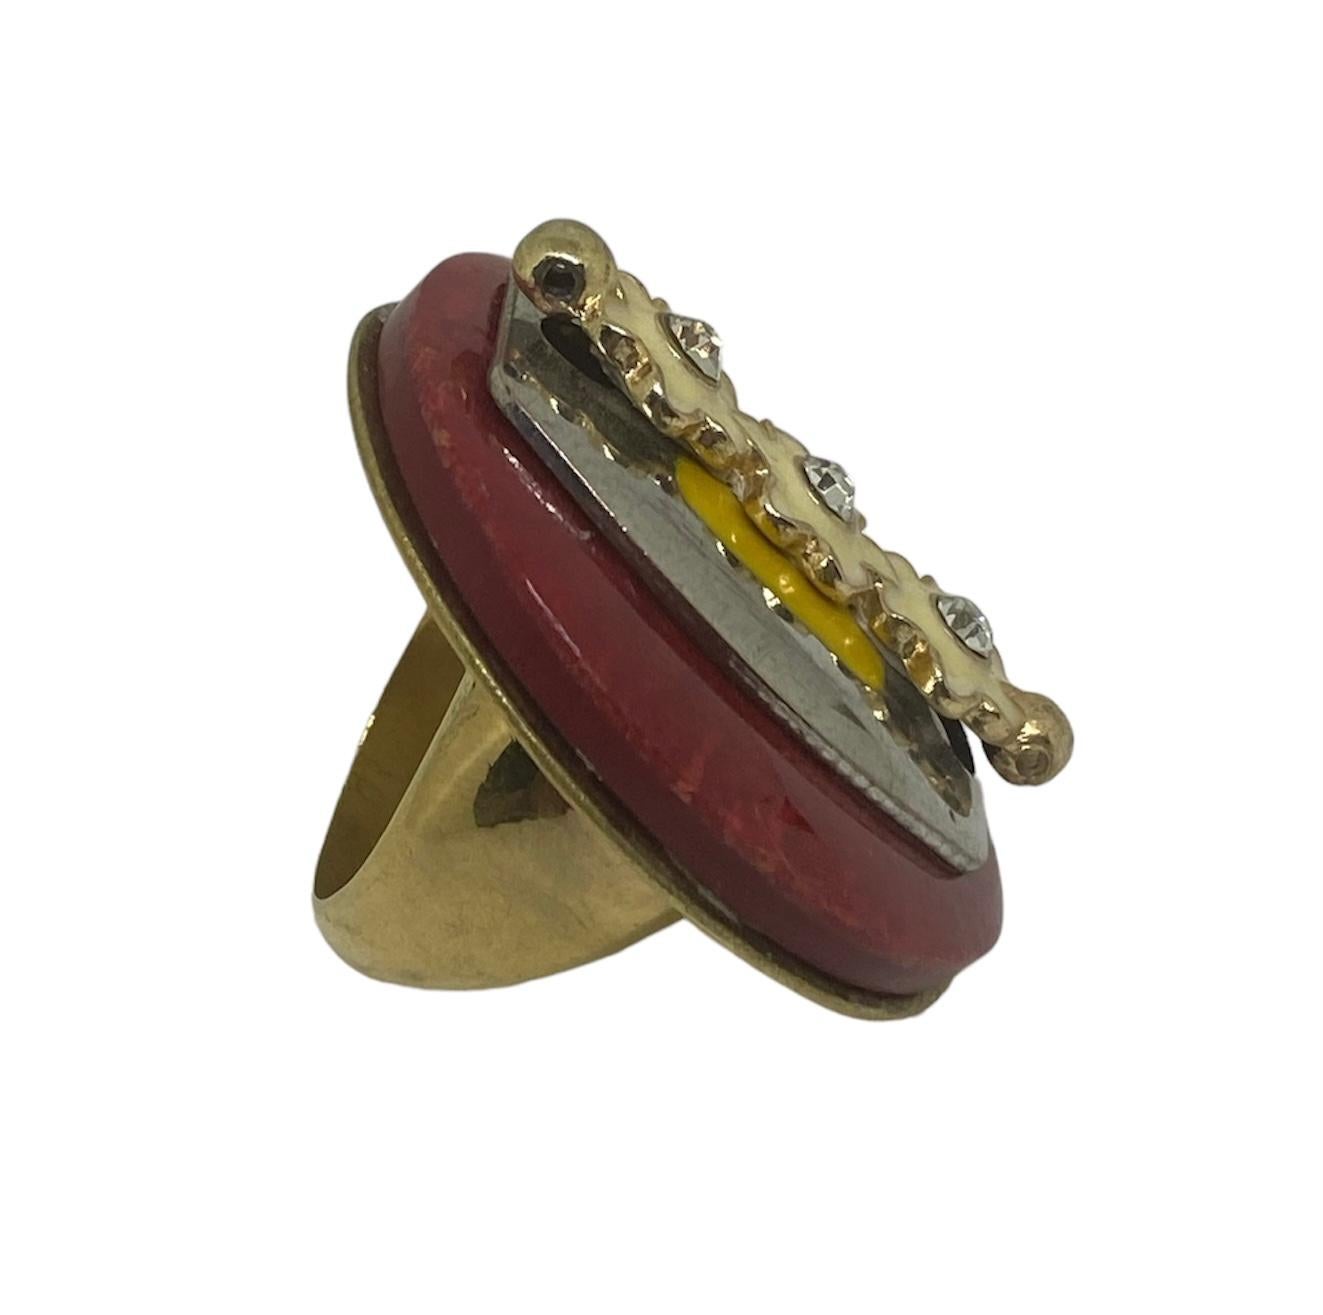 Artisan One Off Ring. High Upcycling. Quartz, Gold Plated Bronze & Vintage Elements. For Sale